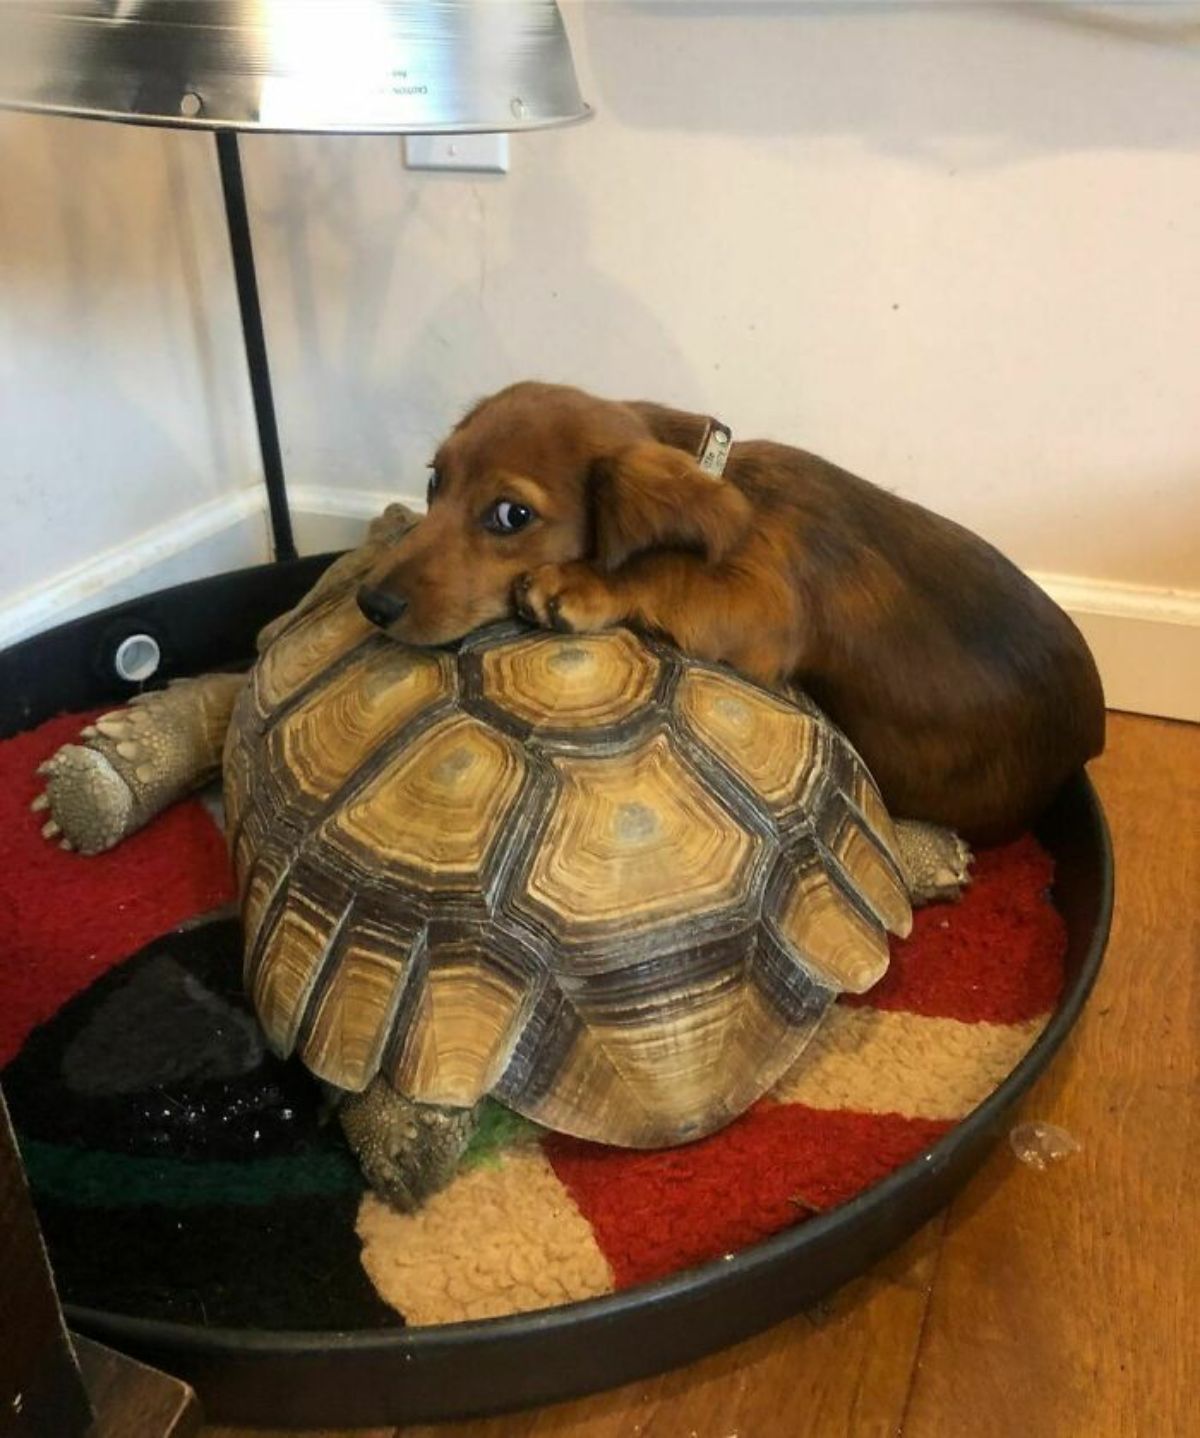 brown puppy laying its head and front paws on the shell of a tortoise with both laying in a black and red bed under a silver heat lamp